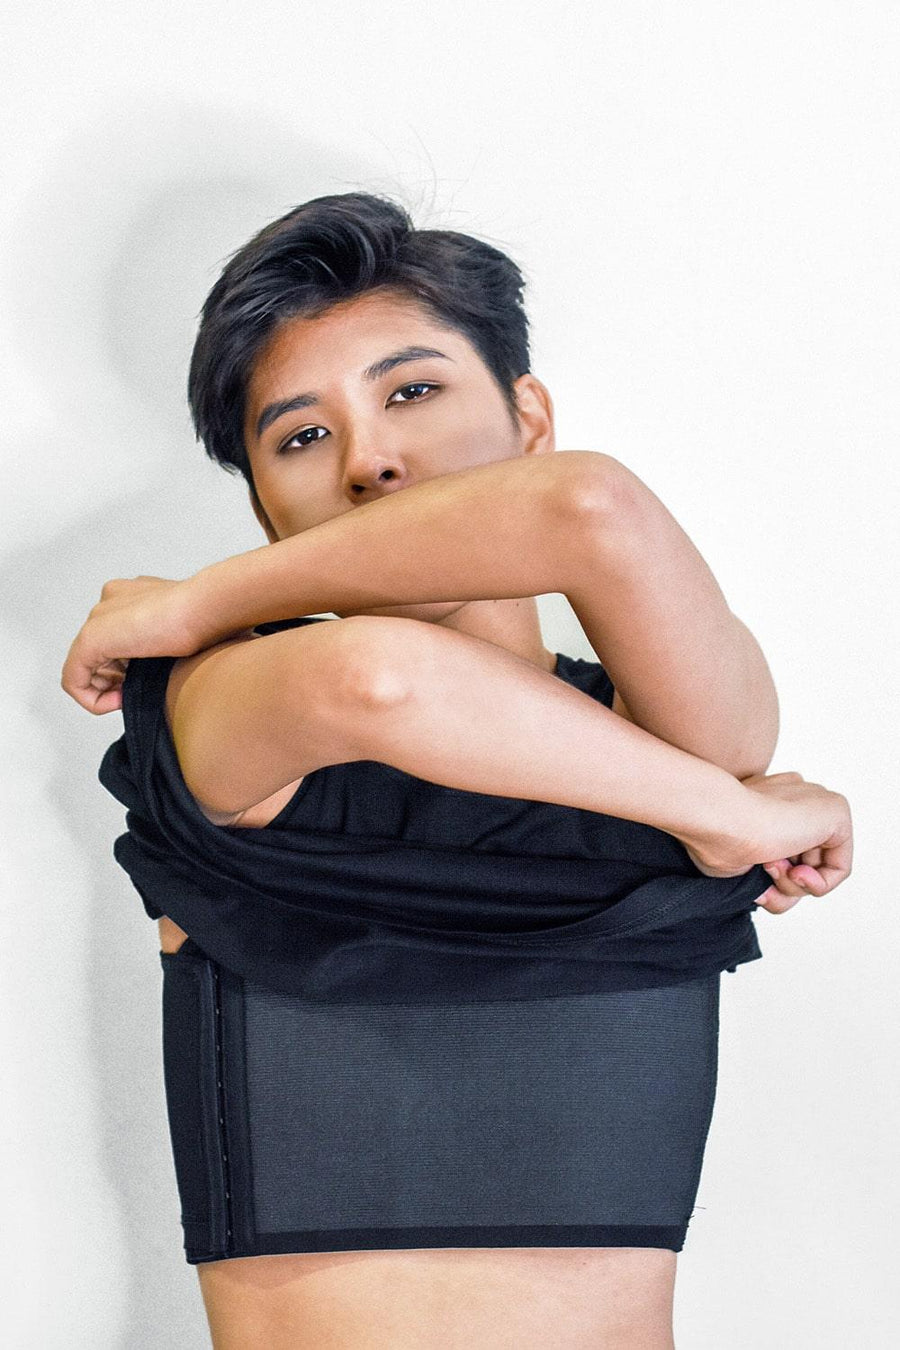 A non-binary androgynous tomboy, transgender man wearing a black color of a TOMSCOUT 20cm bandage 2 IN 1 Tank Top Chest Binder to fight body dysphoria, TOMSCOUT INSPIRED bandage binder.